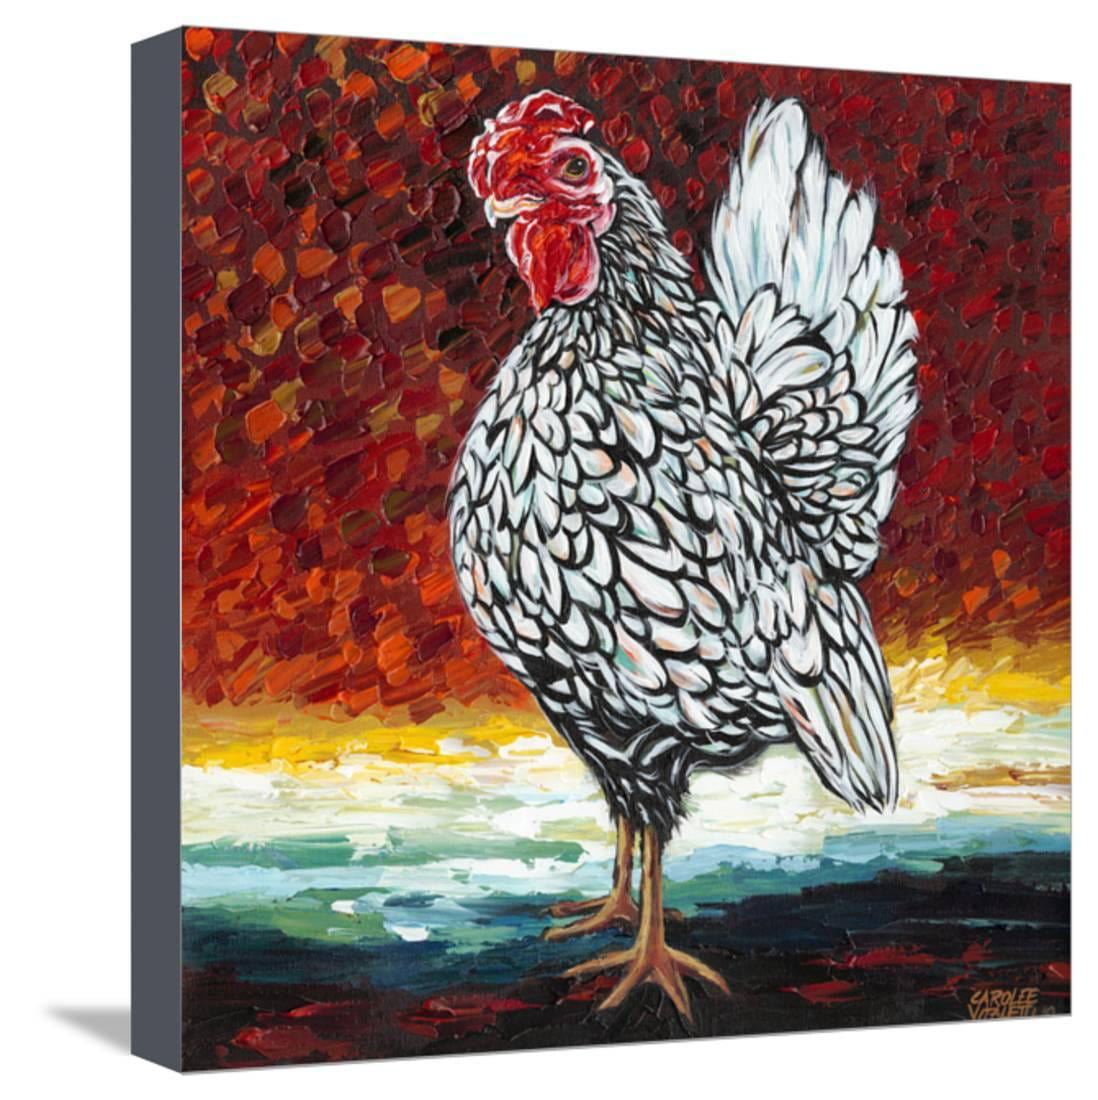 The Stupell Home Decor Blue Tinted Cow and Rooster Pasture Painting Wall Plaque Art 12 x 12 Multi-Color 